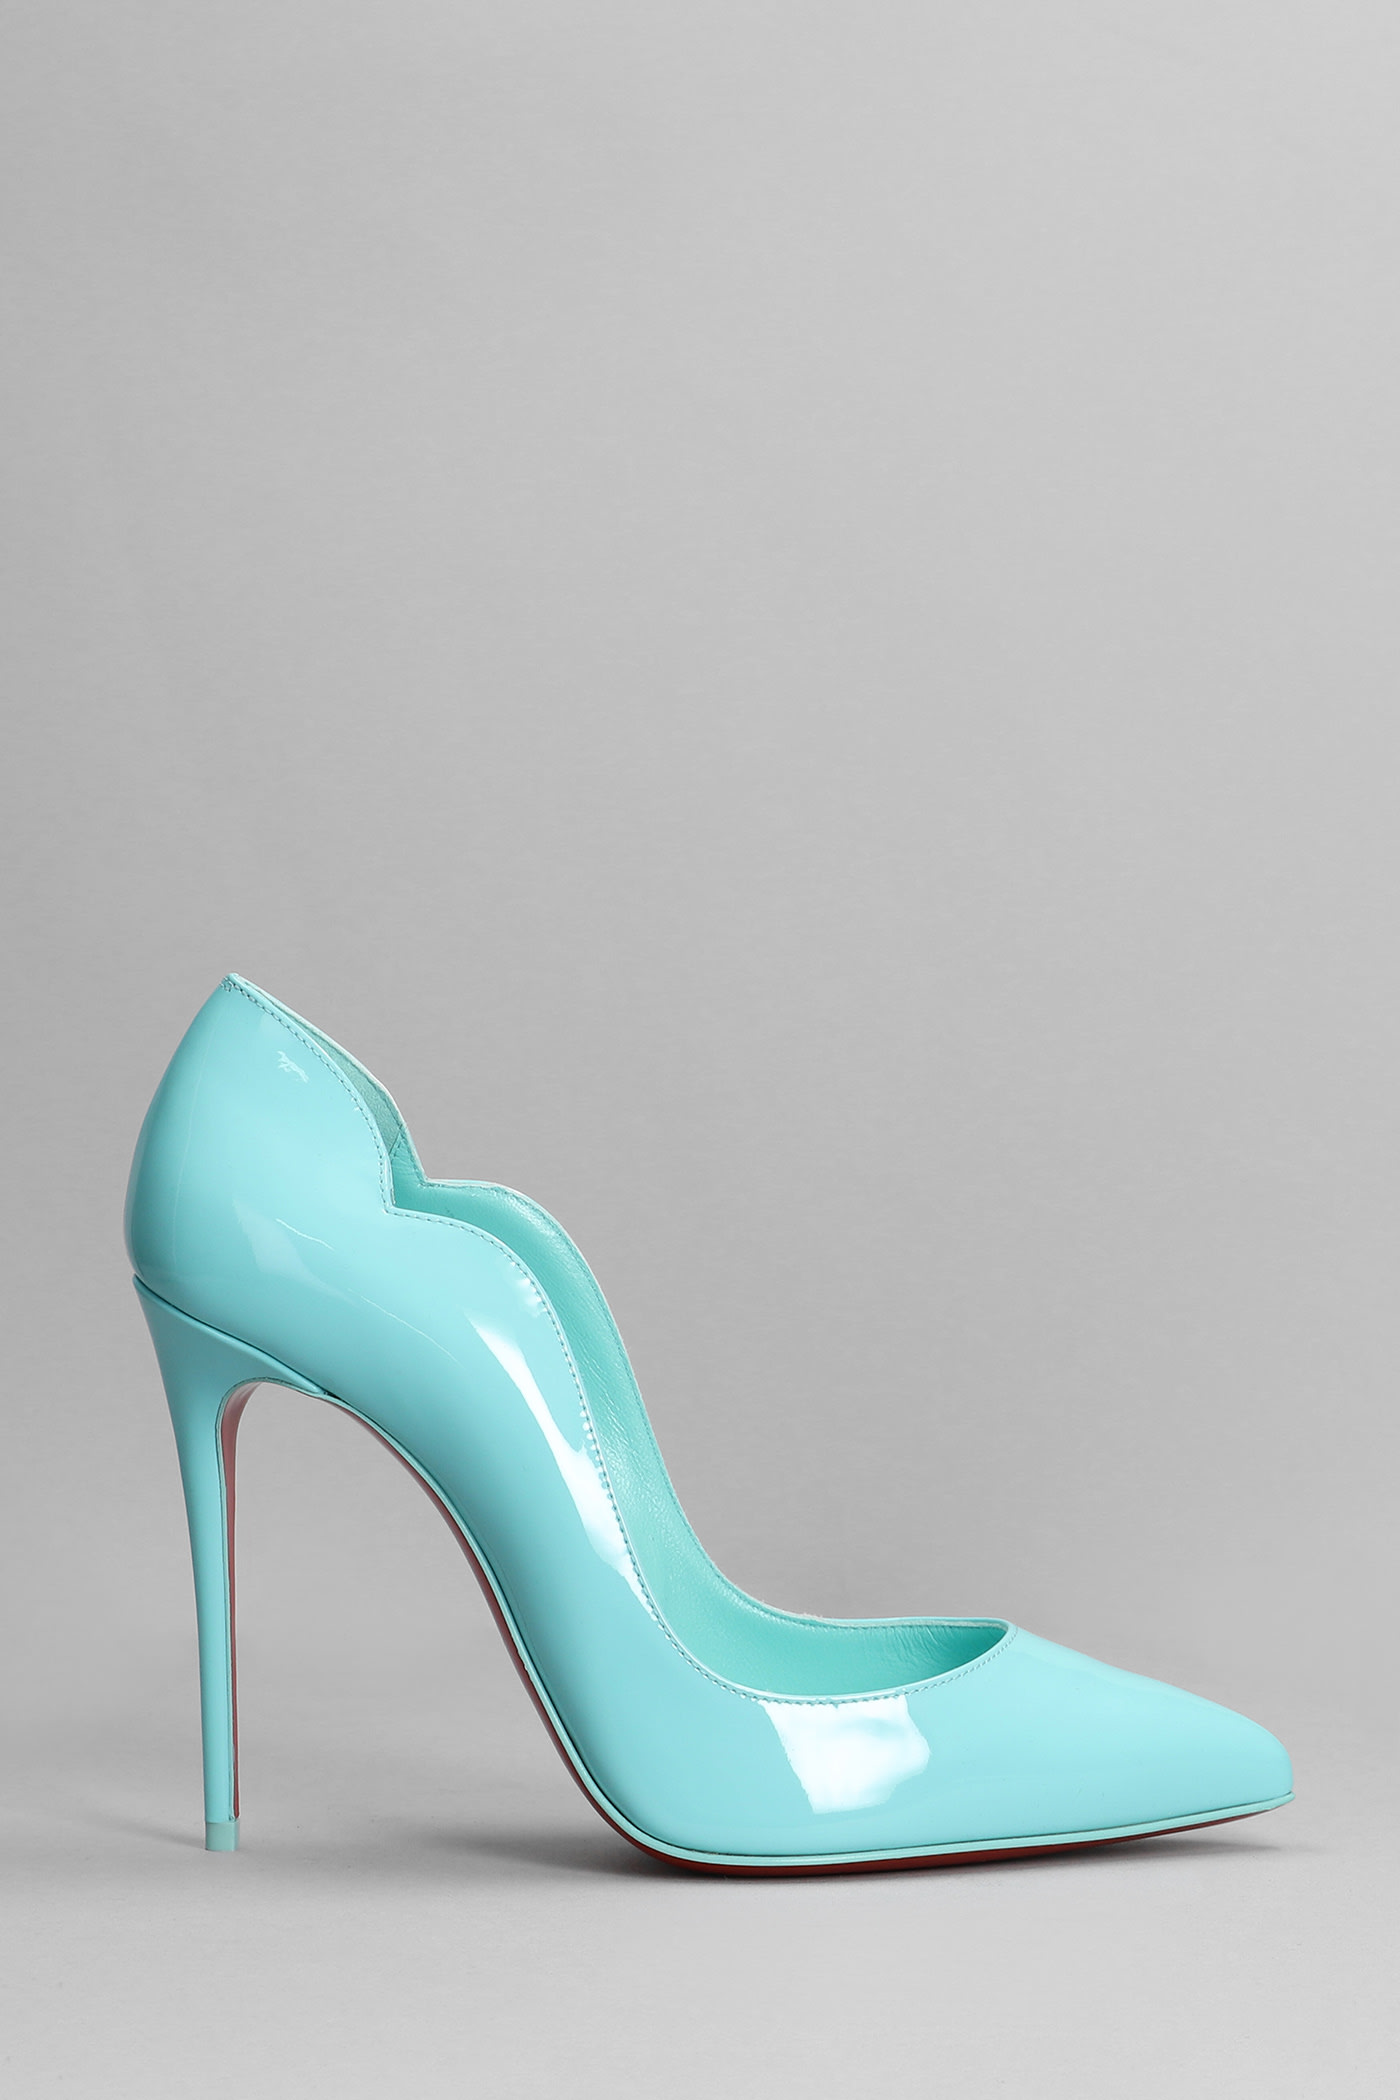 CHRISTIAN LOUBOUTIN HOT CHICK 100 PUMPS IN CYAN PATENT LEATHER